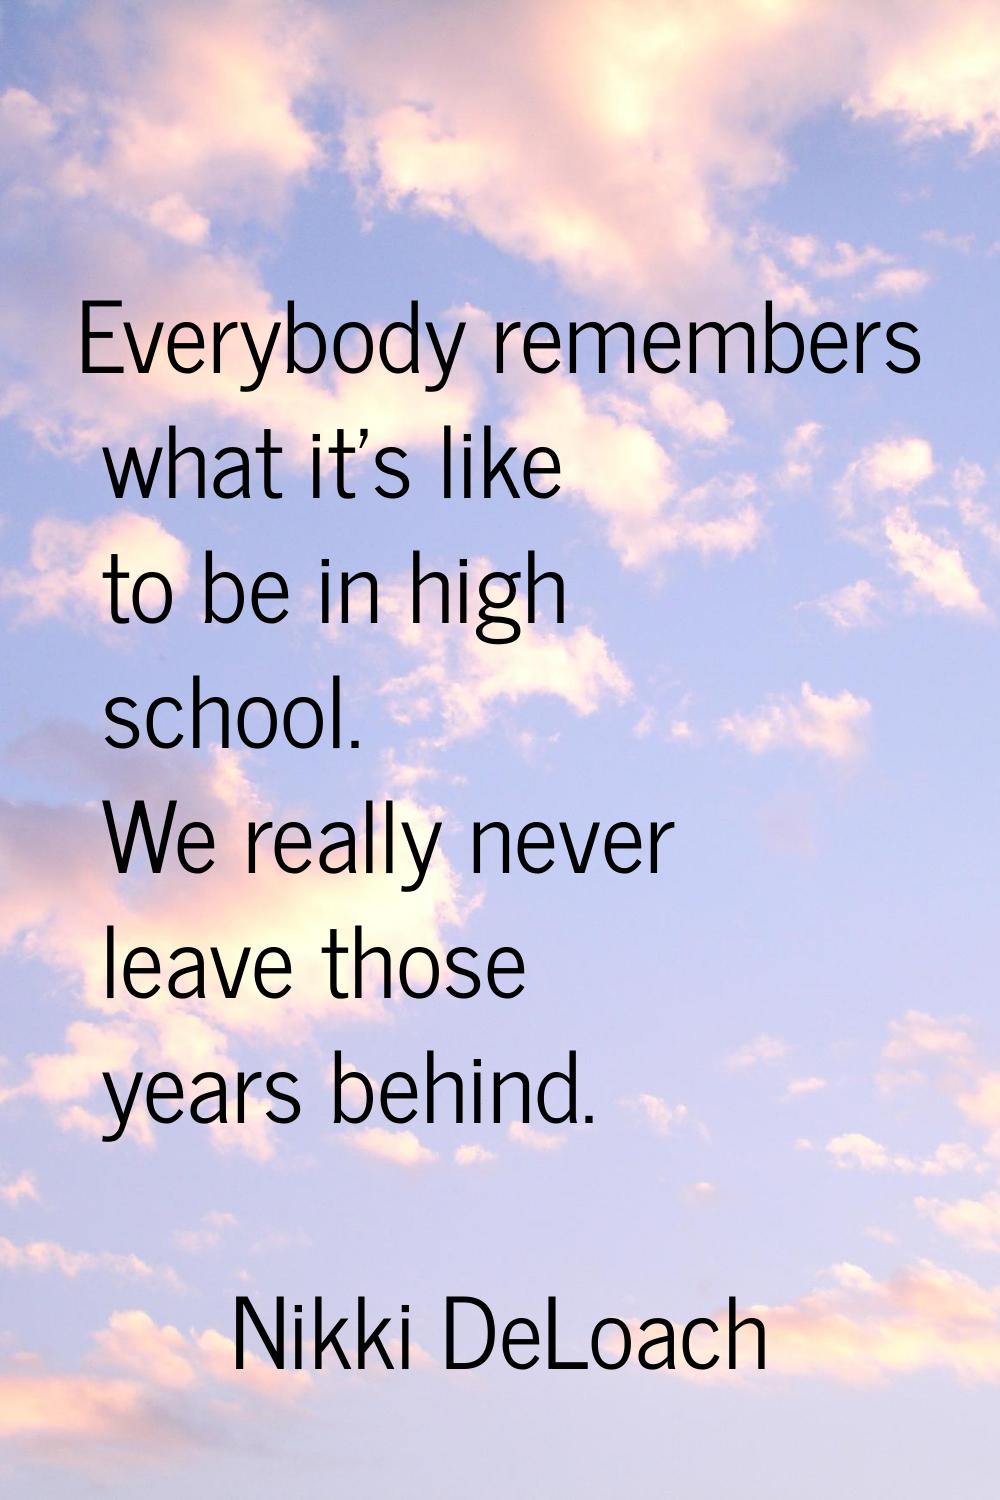 Everybody remembers what it's like to be in high school. We really never leave those years behind.